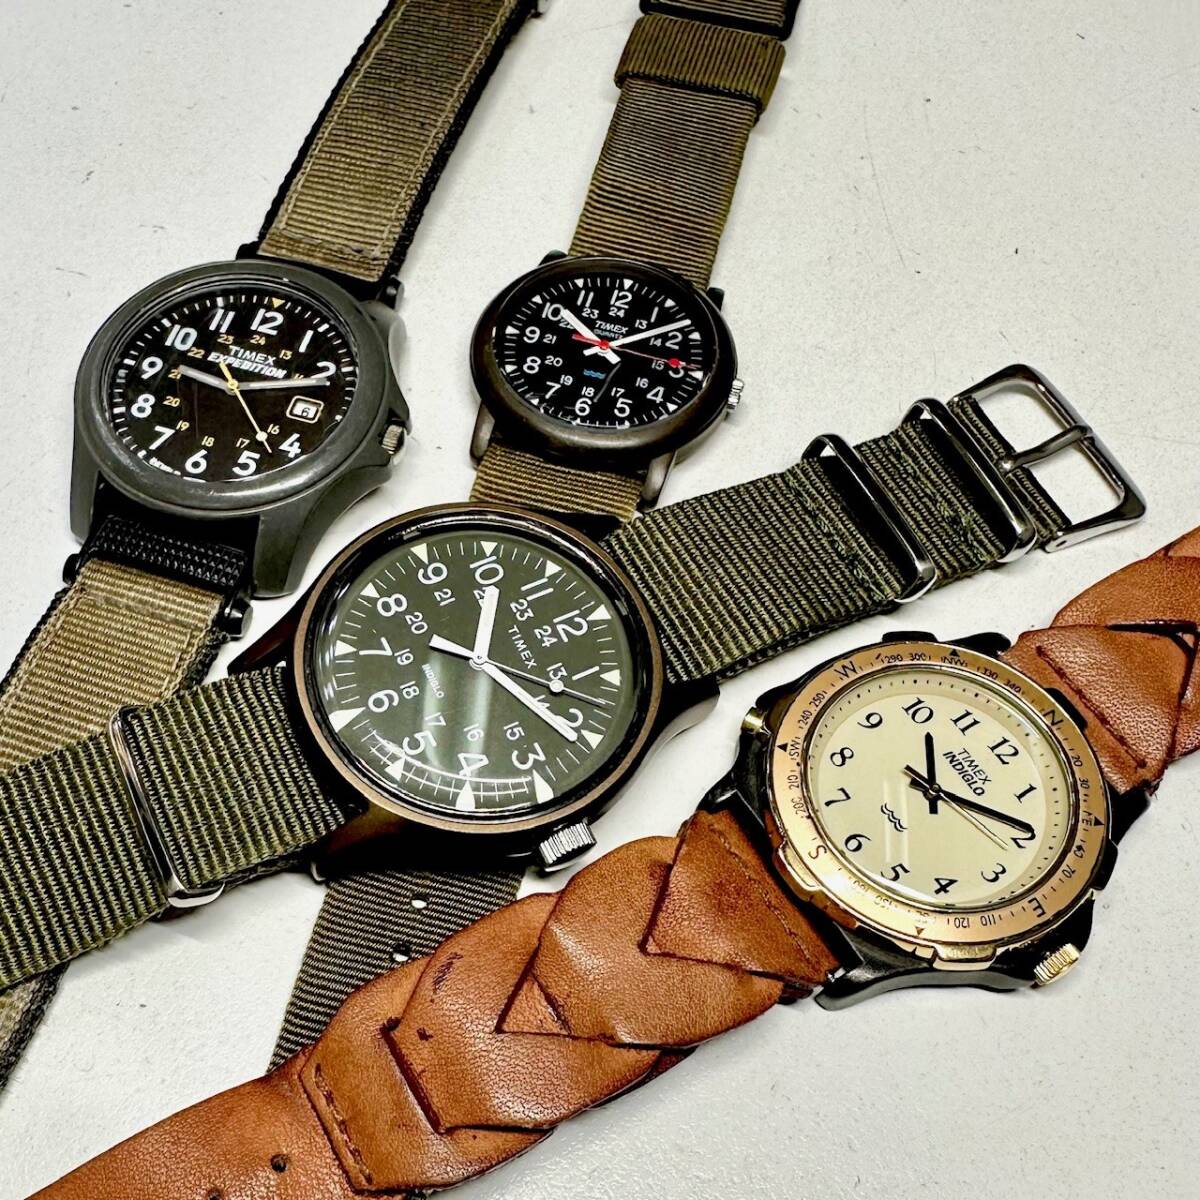 【TIMEX 腕時計まとめて4本】タイメックス INDIGLO WR30/EXPEDITION WR50M/395LA CELL/376MA CELL_画像1